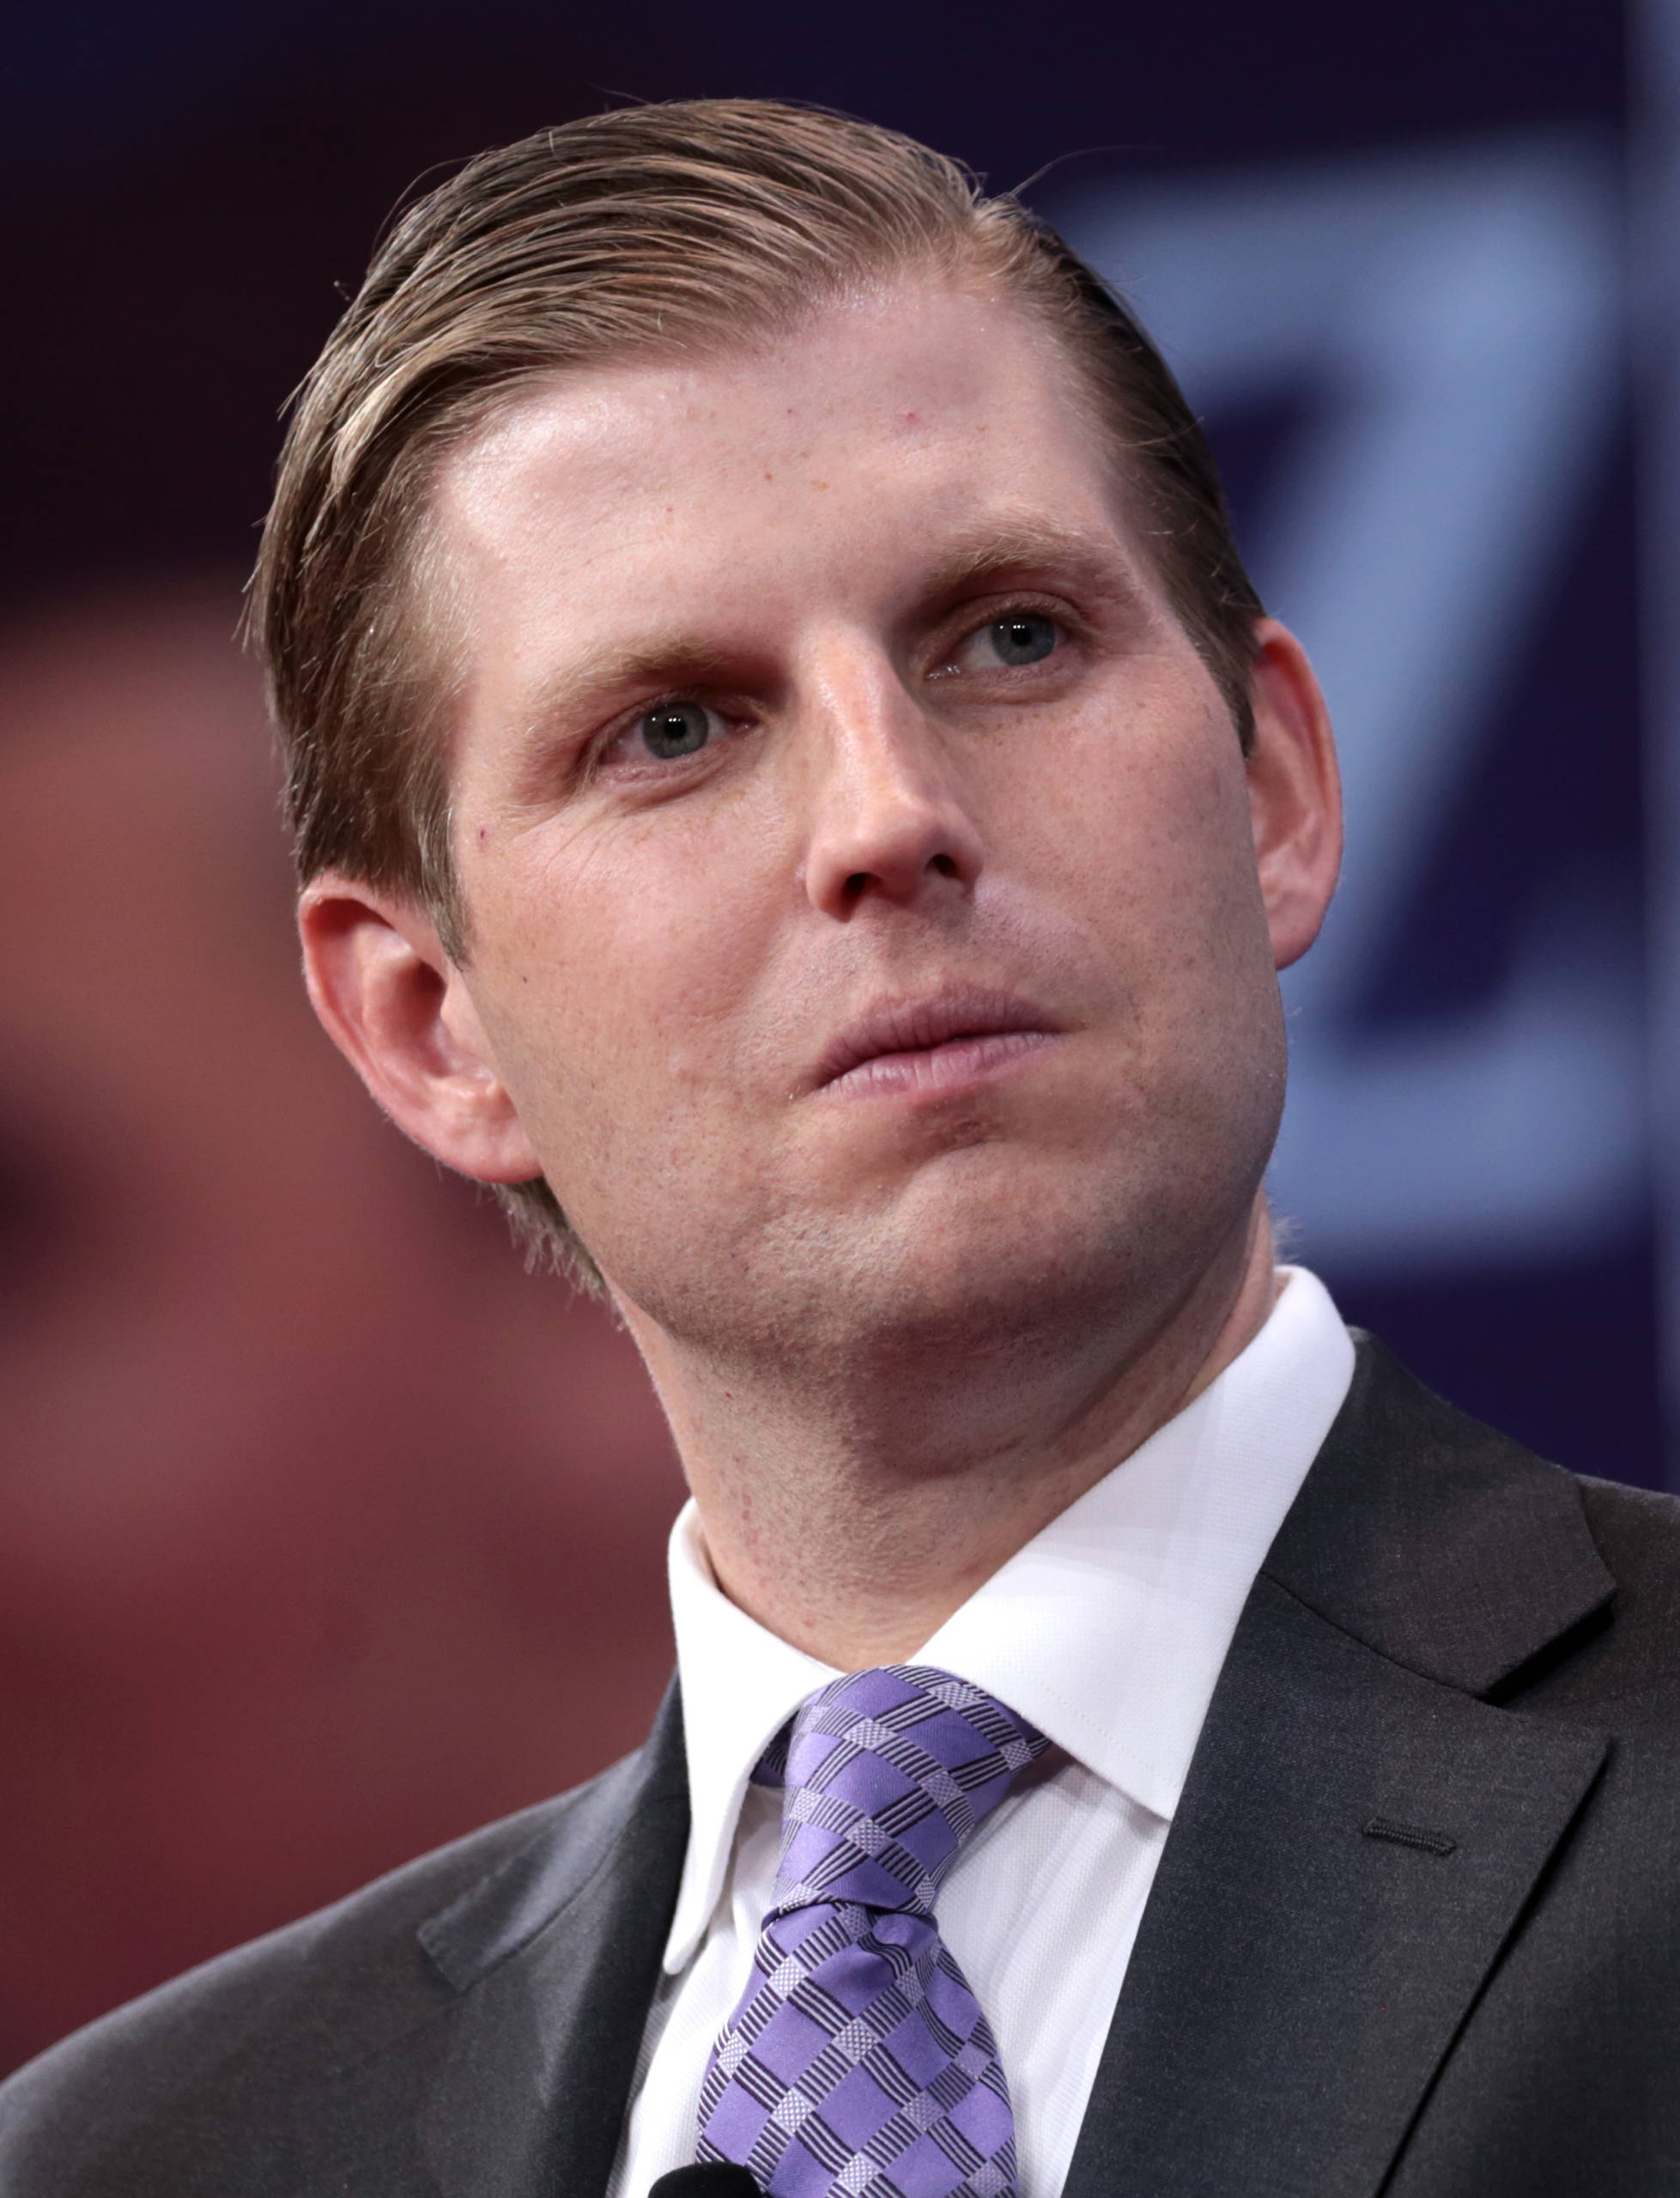 Eric Trump by Gage Skidmore scaled